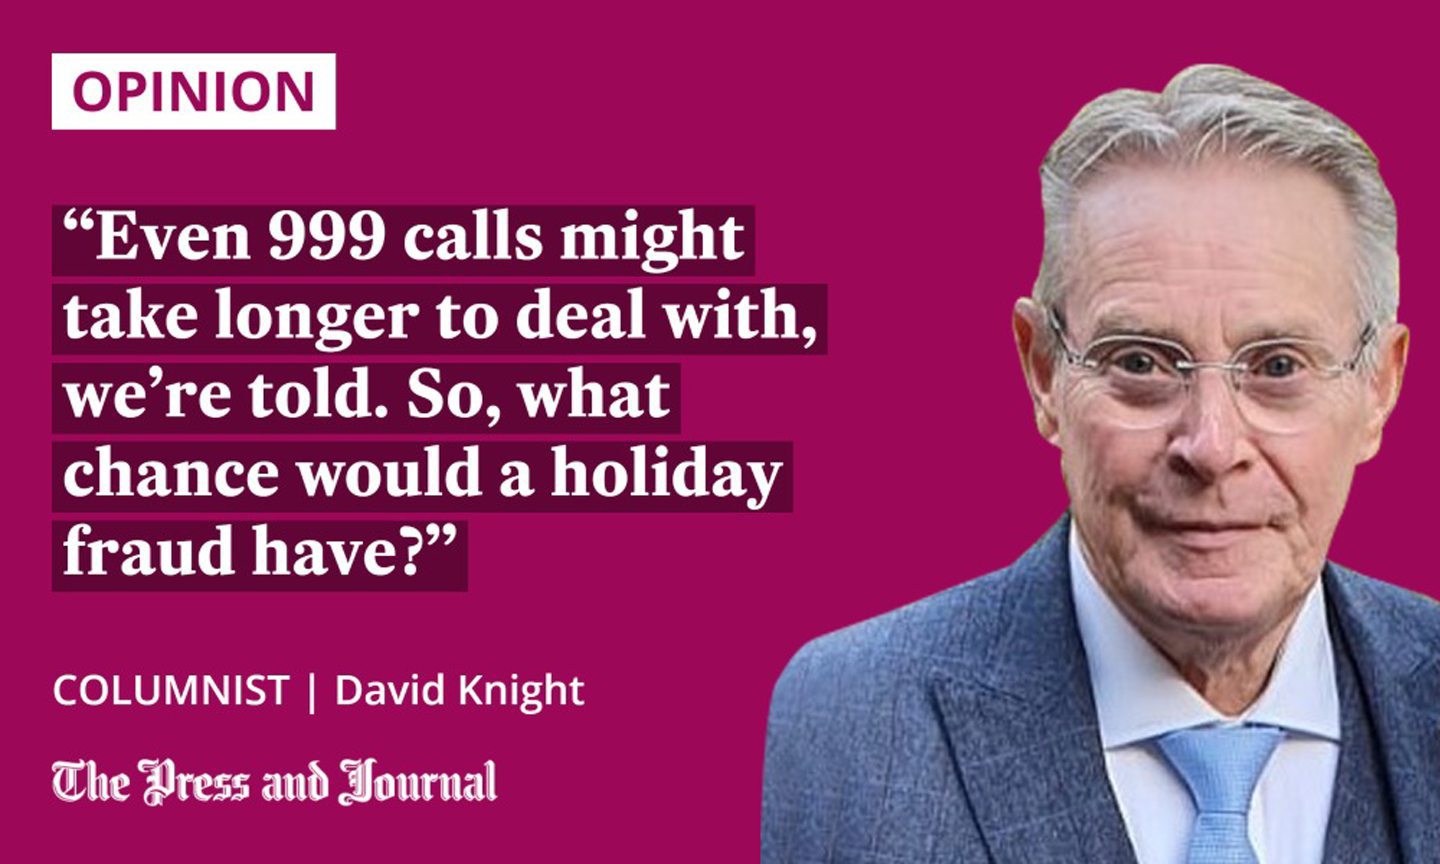 Quotation from columnist David Knight regarding Police Scotland's budget crisis: "Even 999 calls might take longer to deal with, we're told. So, what change would a holiday fraud have?"